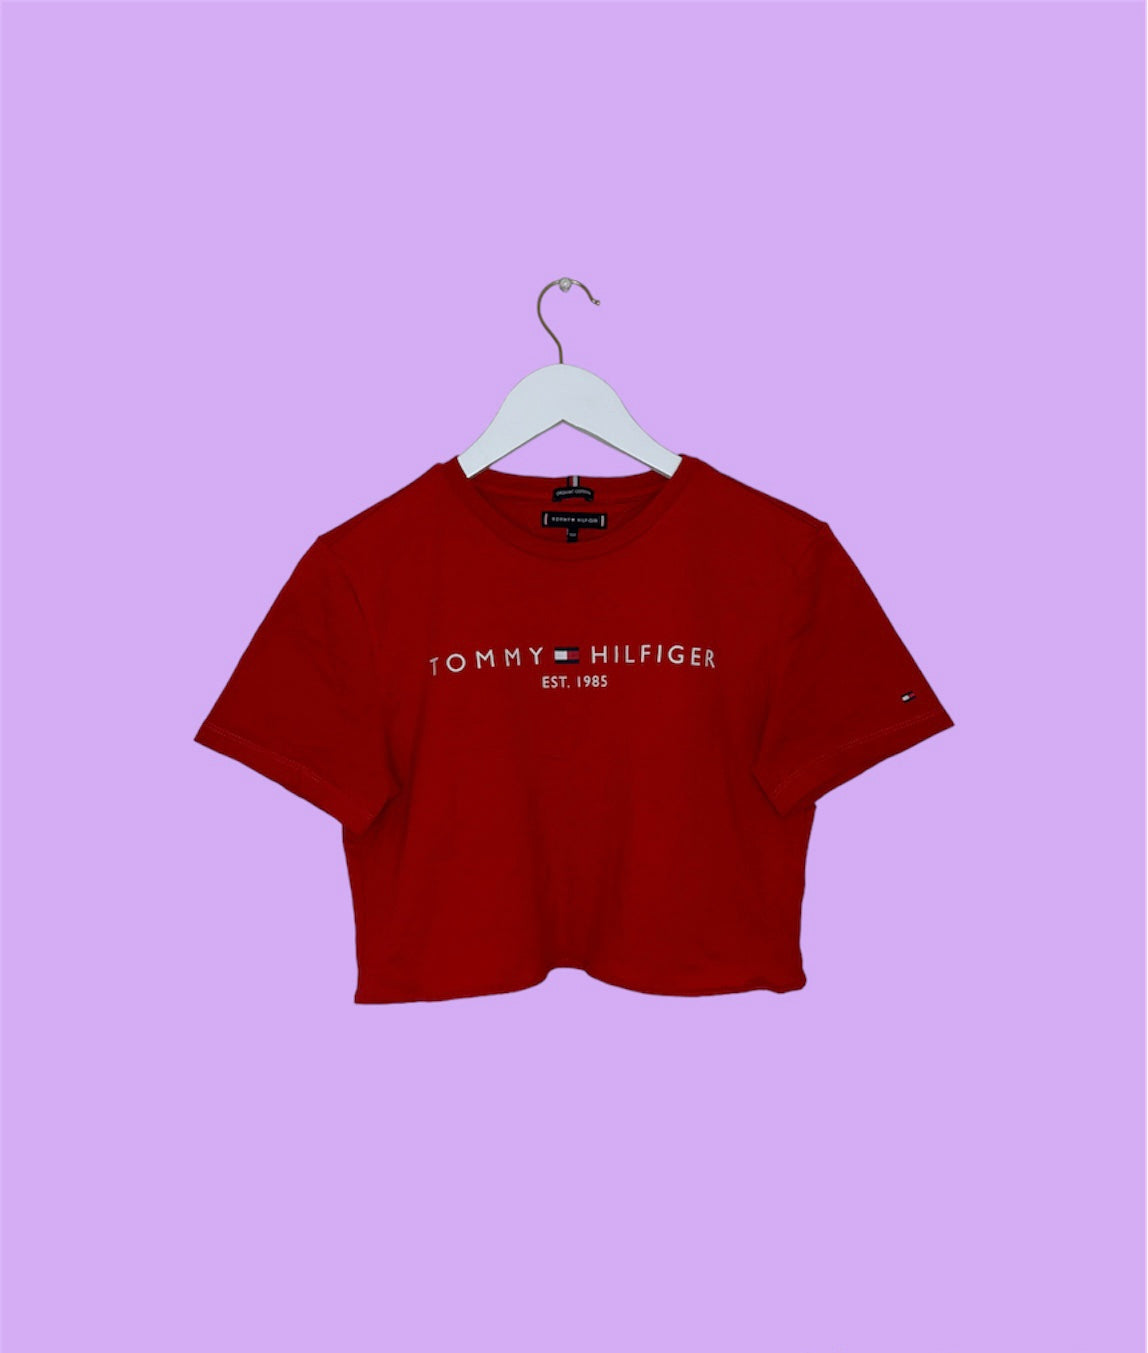 red short sleeve crop top with white tommy hilfiger logo shown on a lilac background